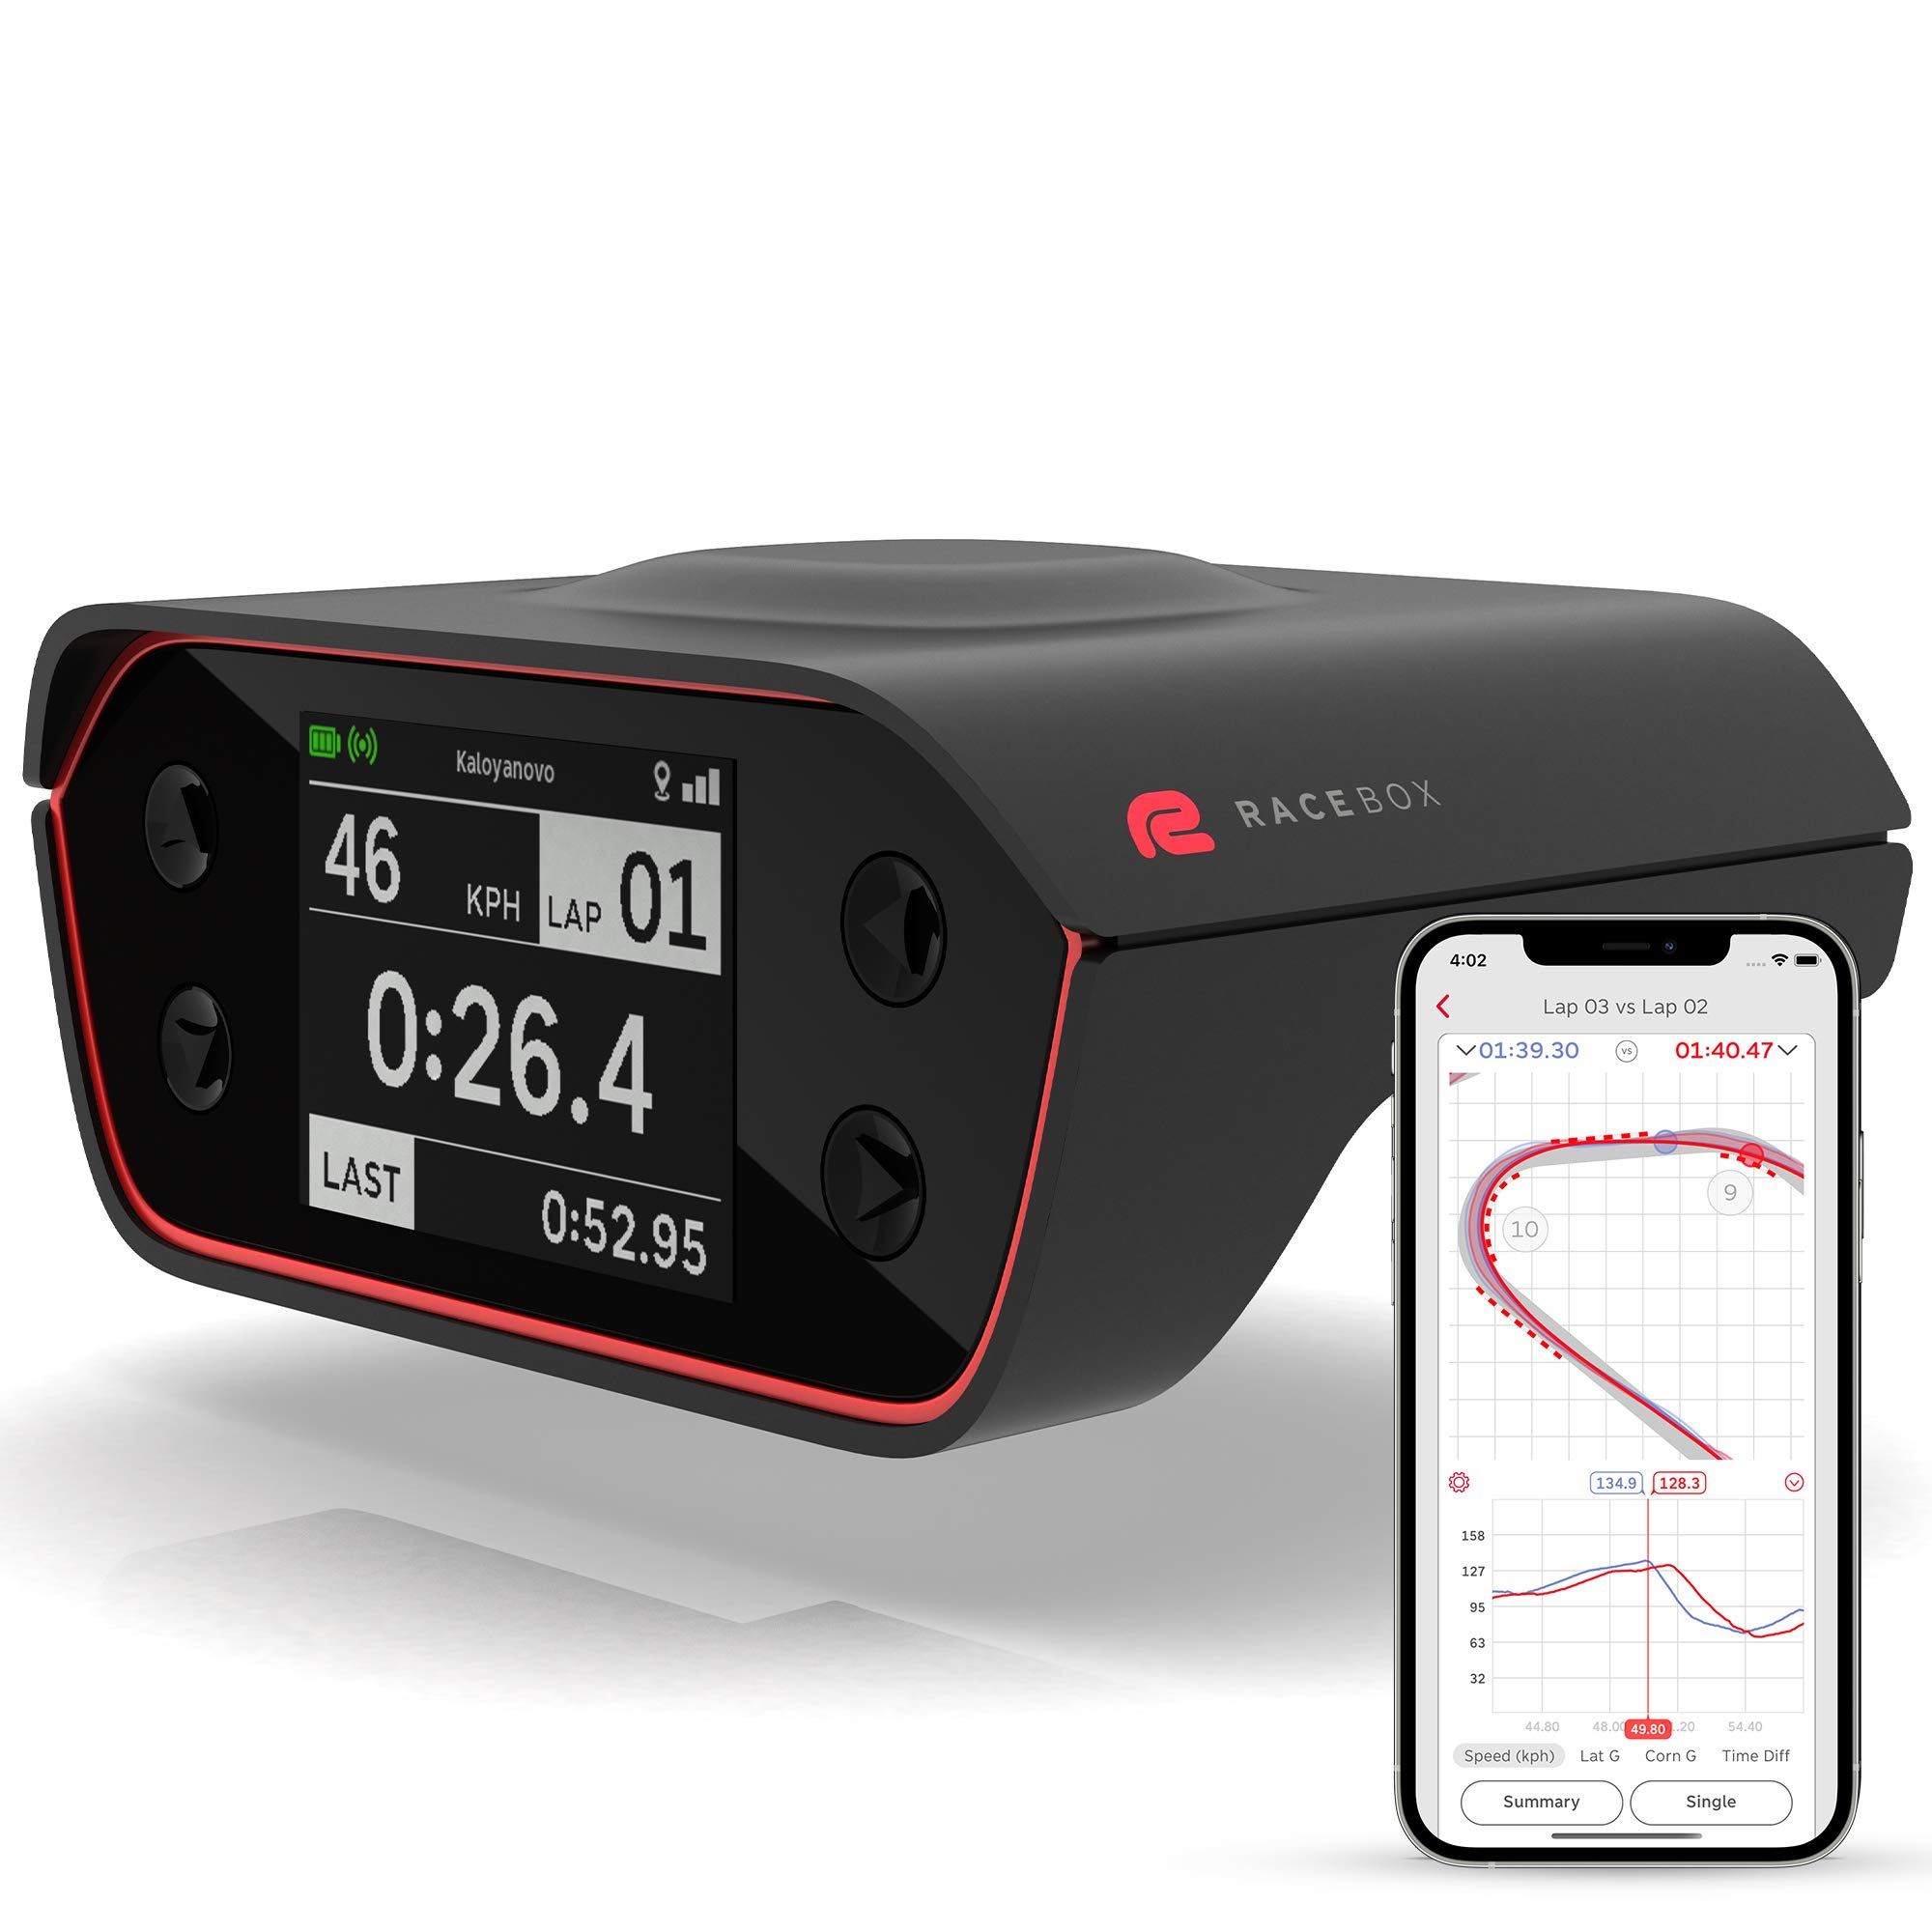 RaceBox 10Hz GPS Official Based Performance Meter Box with Mobile App - Car Lap Timer and Drag Meter - Racing Accelerometer Data Logger